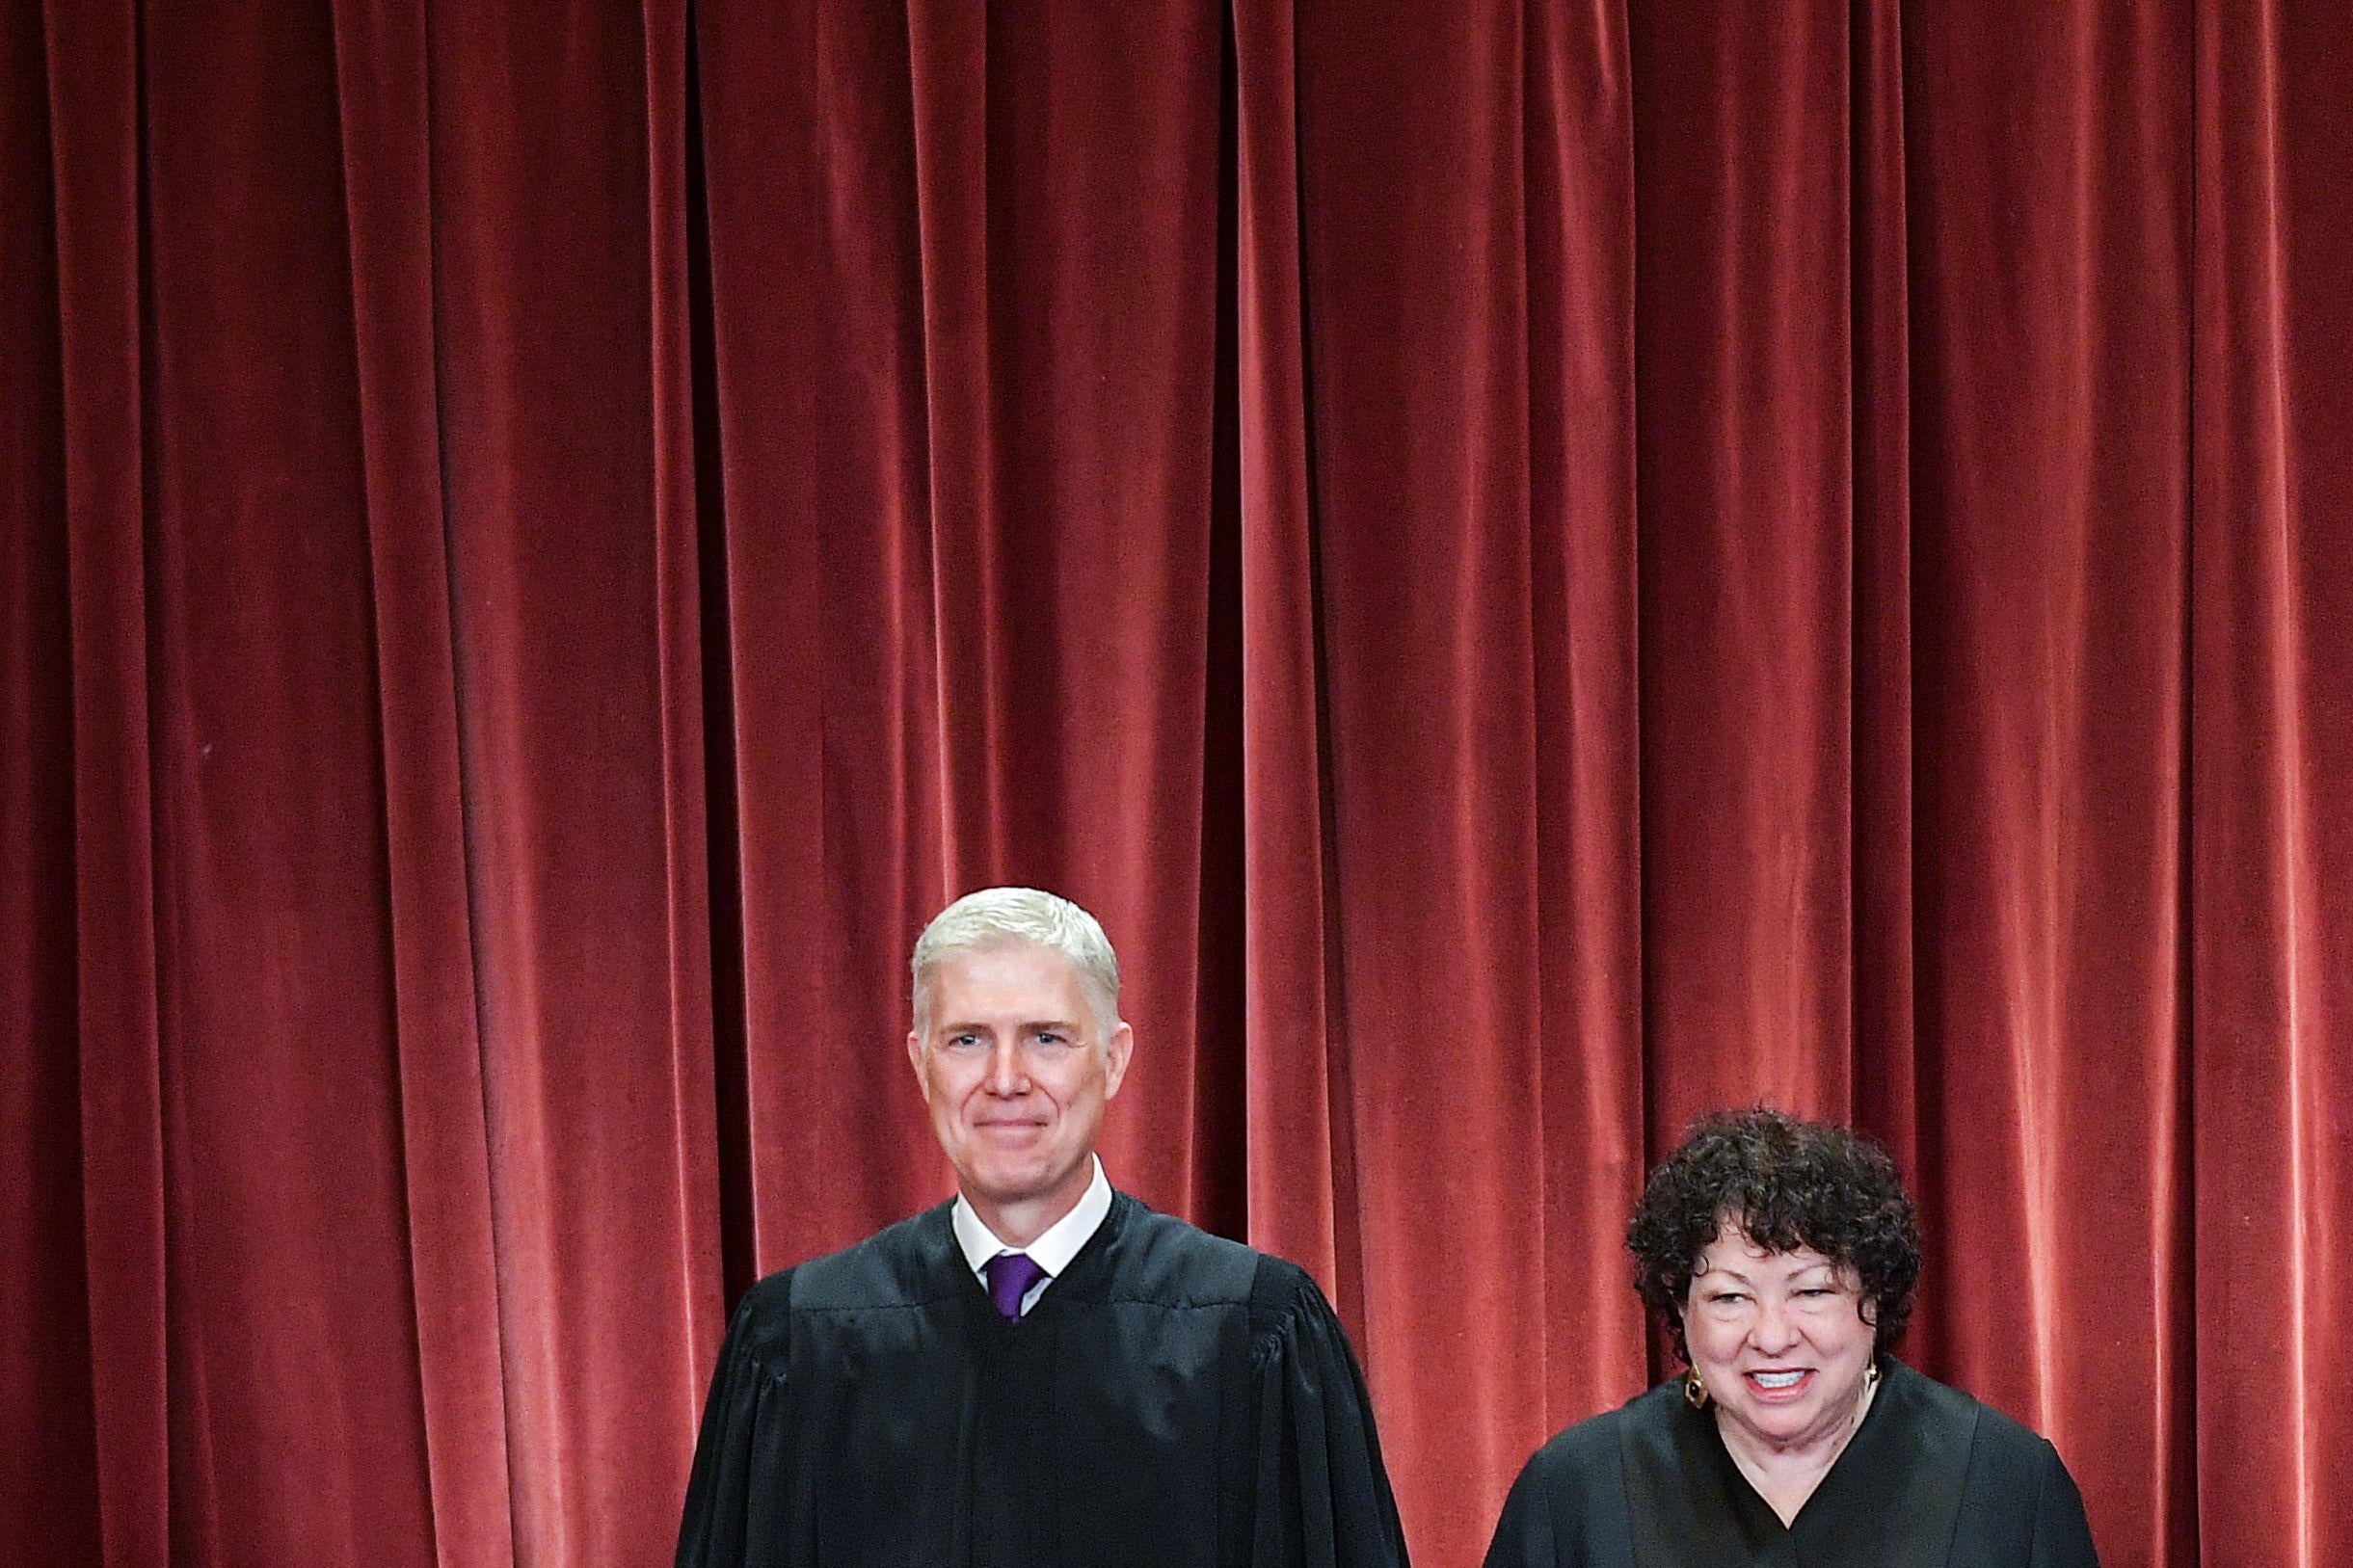 Justices Neil Gorsuch and Sonia Sotomayor